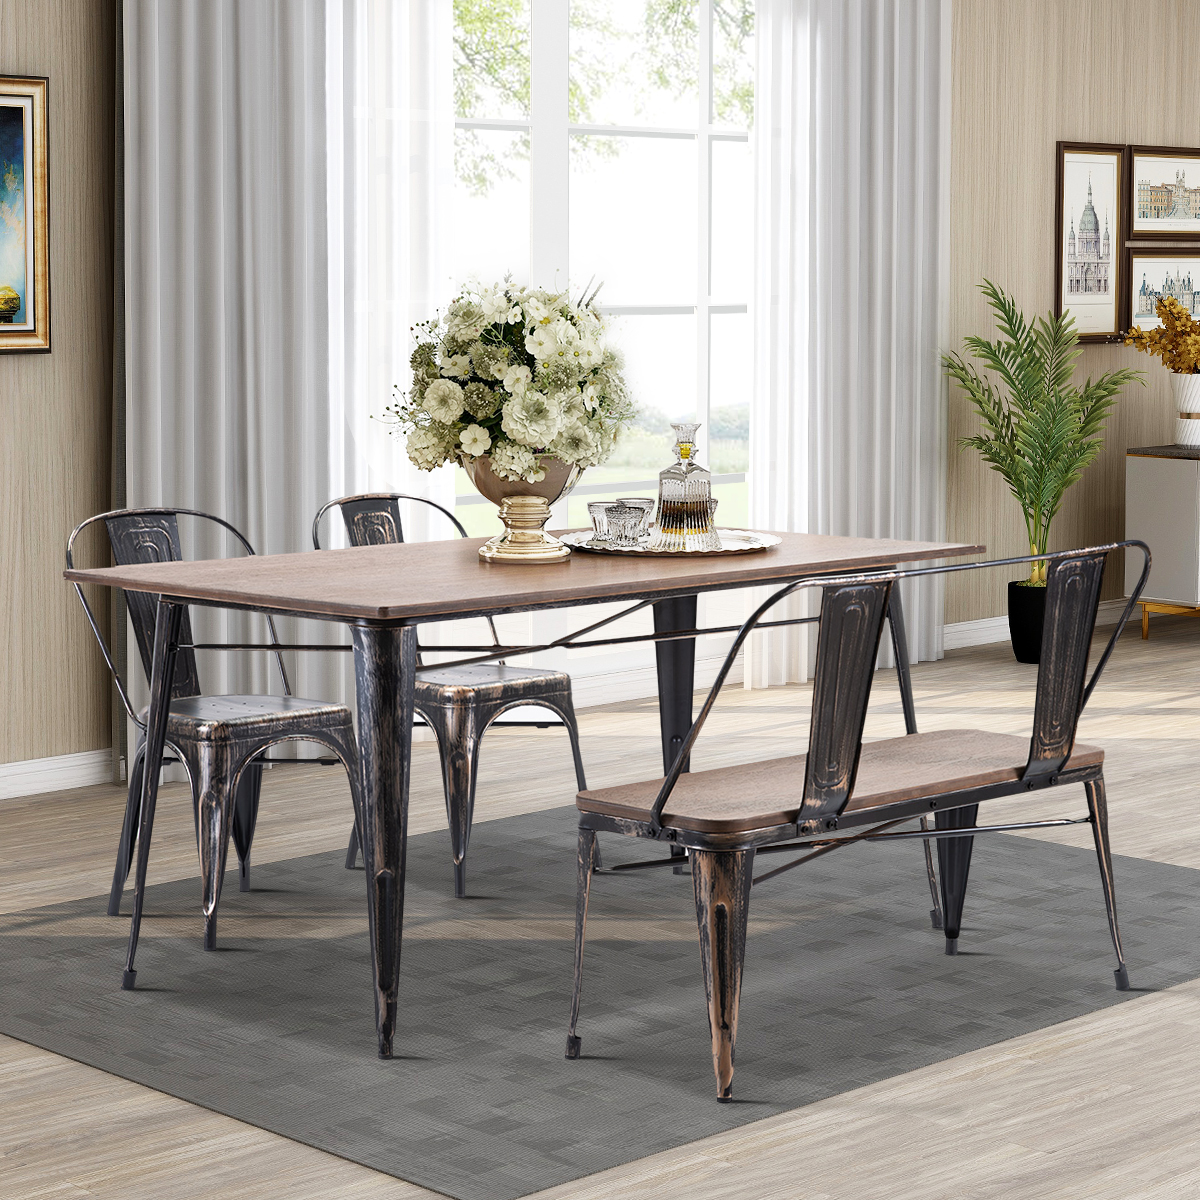 Rustic Vintage Style Dining Table, Bench, Dining Room Furniture